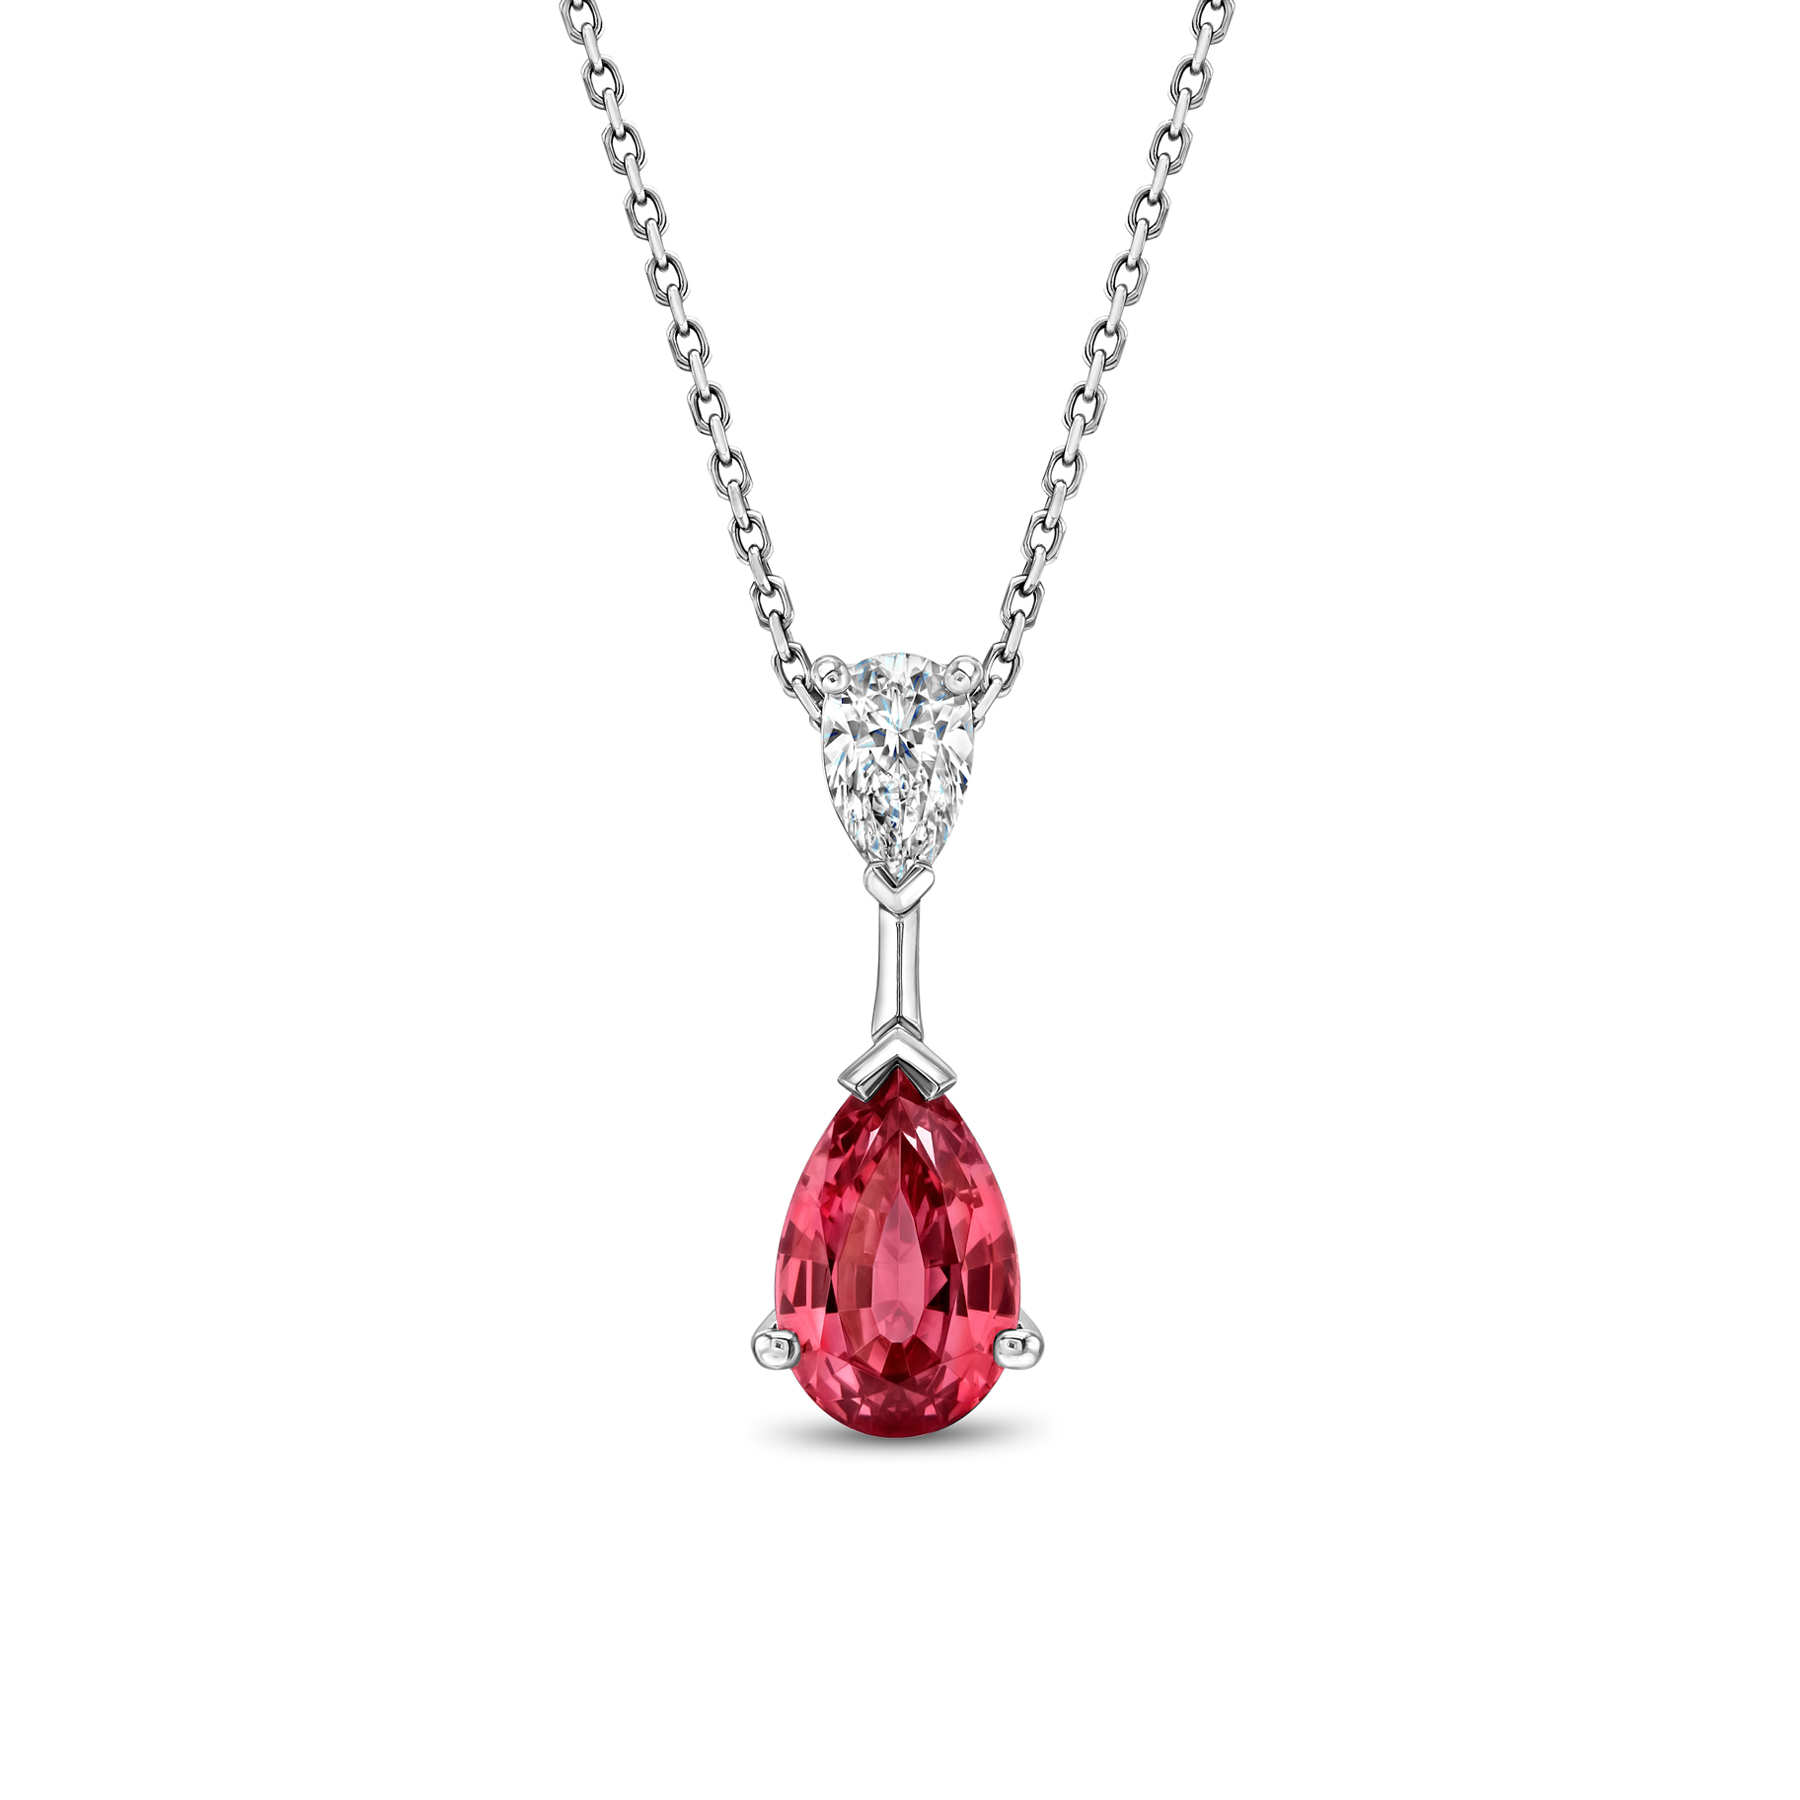 Pear-shaped hot pink spinel